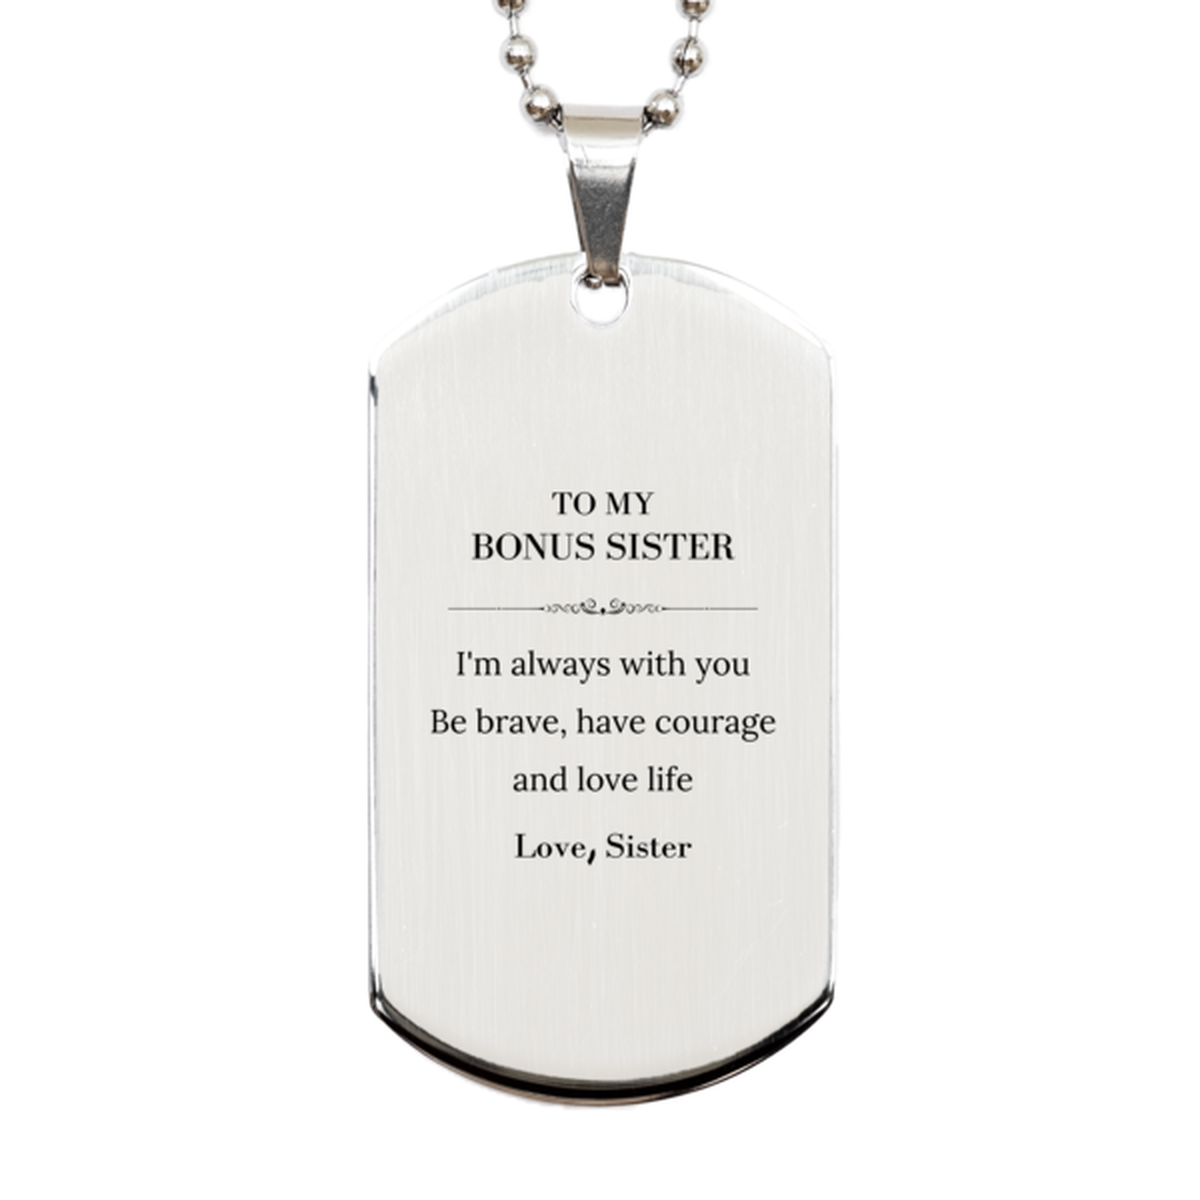 To My Bonus Sister Gifts from Sister, Unique Silver Dog Tag Inspirational Christmas Birthday Graduation Gifts for Bonus Sister I'm always with you. Be brave, have courage and love life. Love, Sister